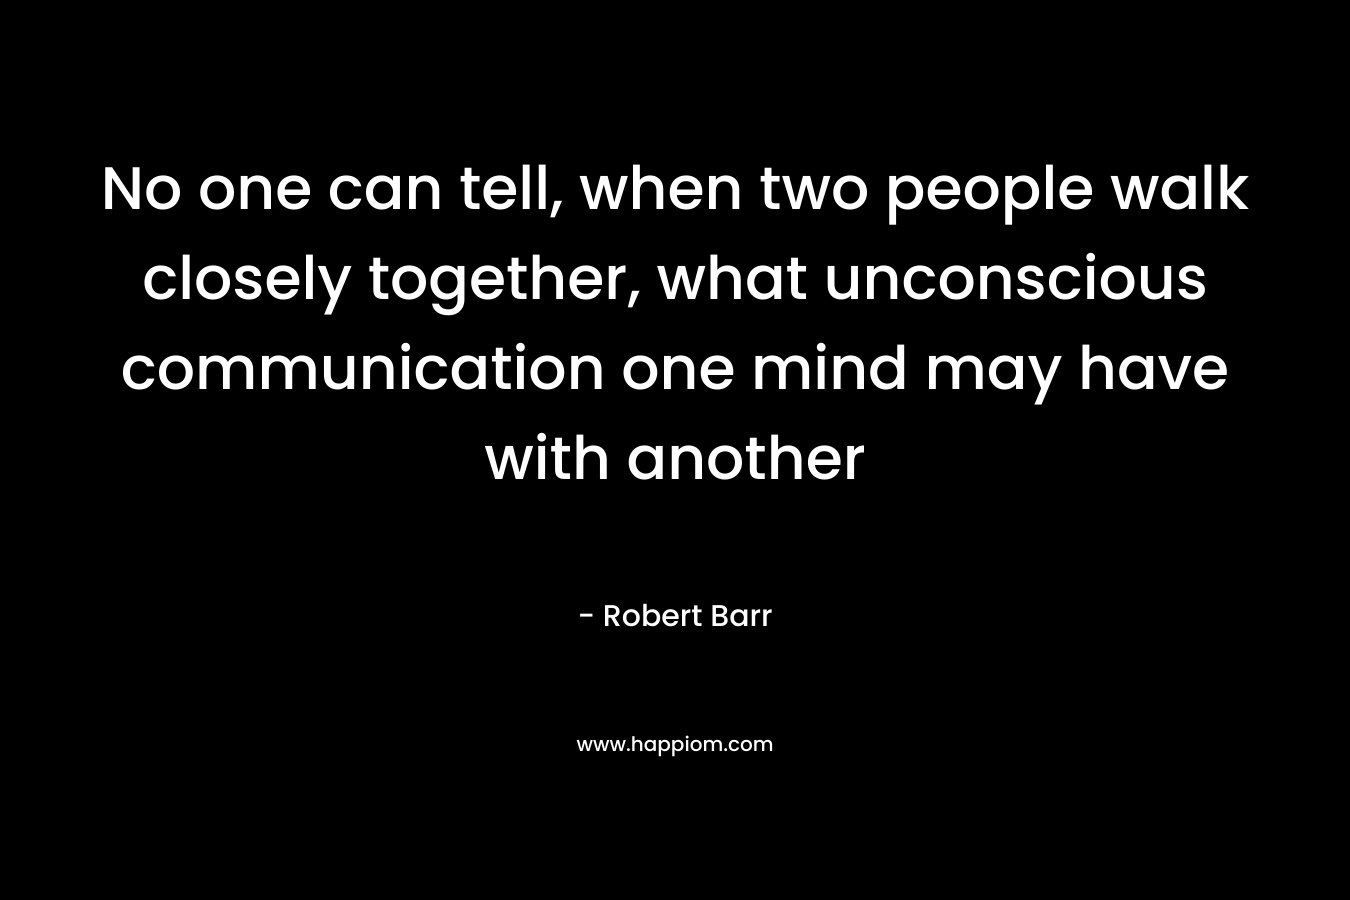 No one can tell, when two people walk closely together, what unconscious communication one mind may have with another – Robert Barr